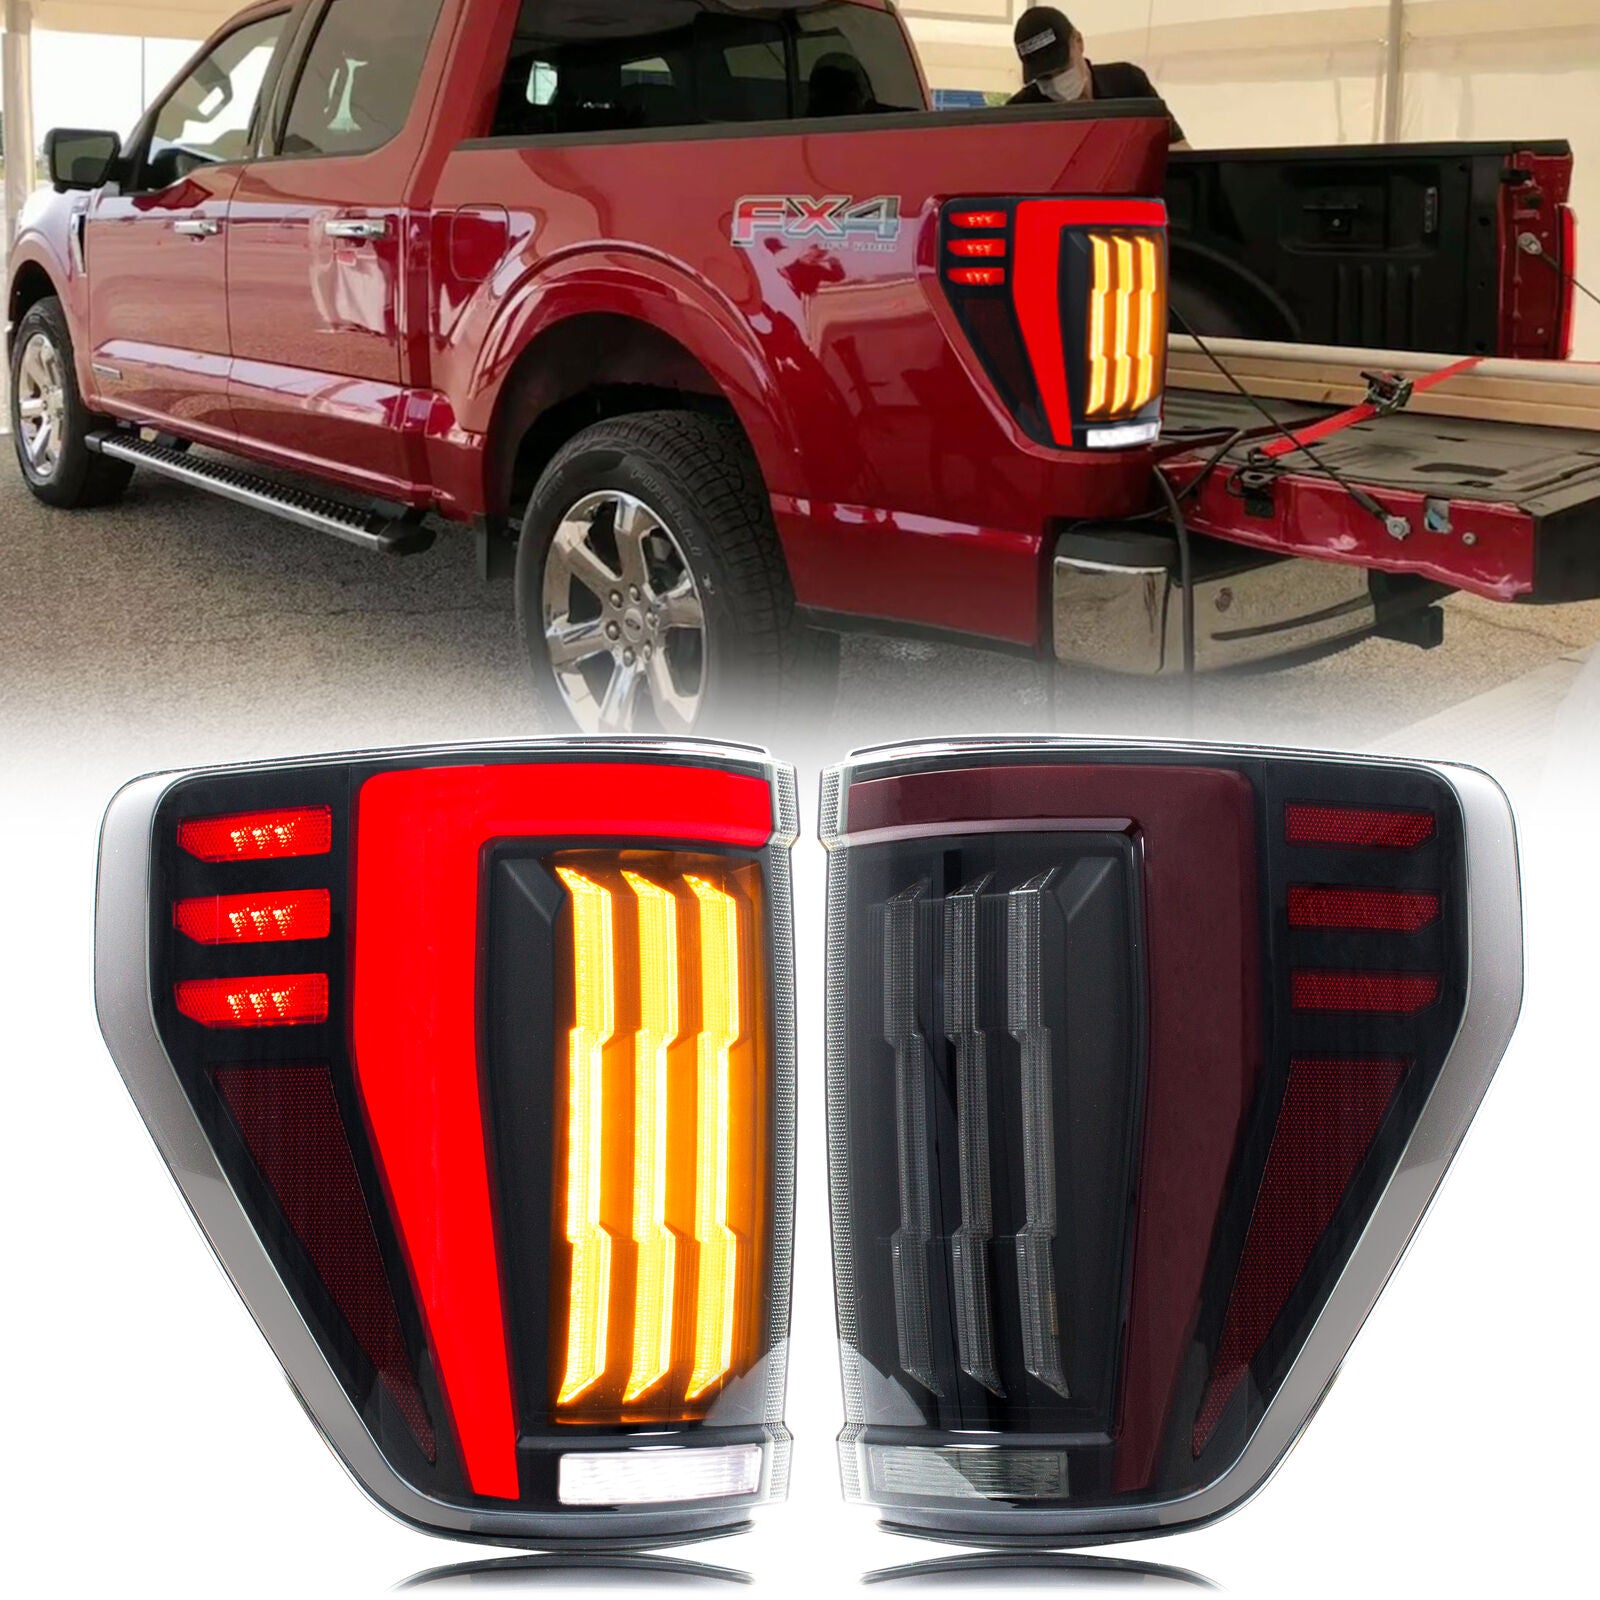 inginuity time LED Tail Lights for Ford F-150 F150 2021 2022 2023